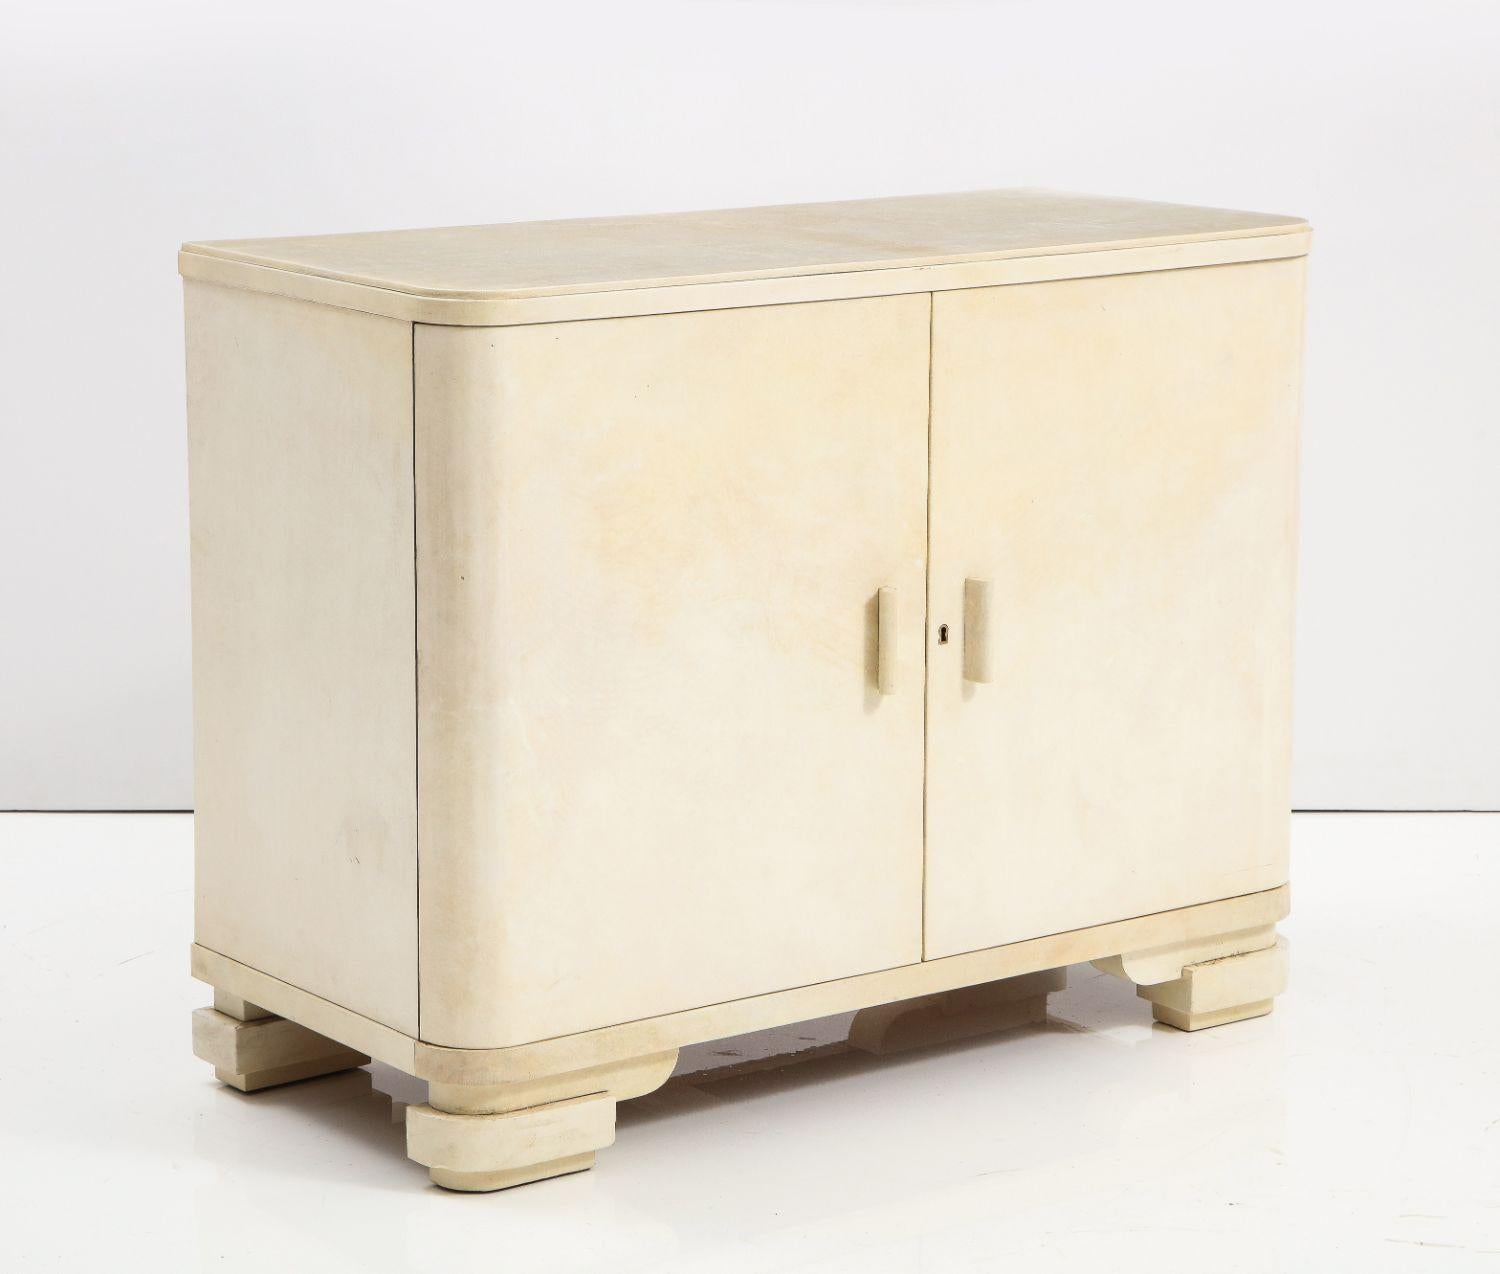 A wonderful Art Deco four drawer chest with rounded front and covered in parchment with fitted interior. Signed N.E. Corengia

